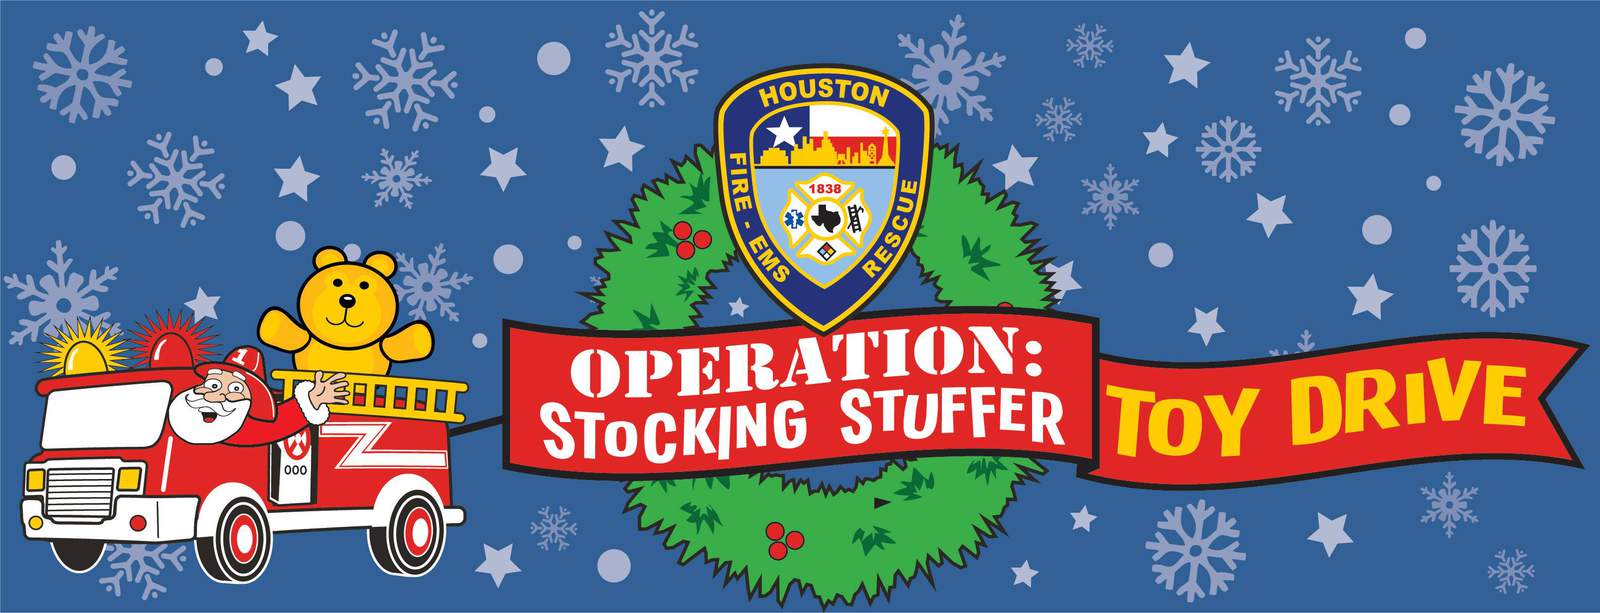 HFD’s kicks off its annual toy drive. Here’s what you need to know